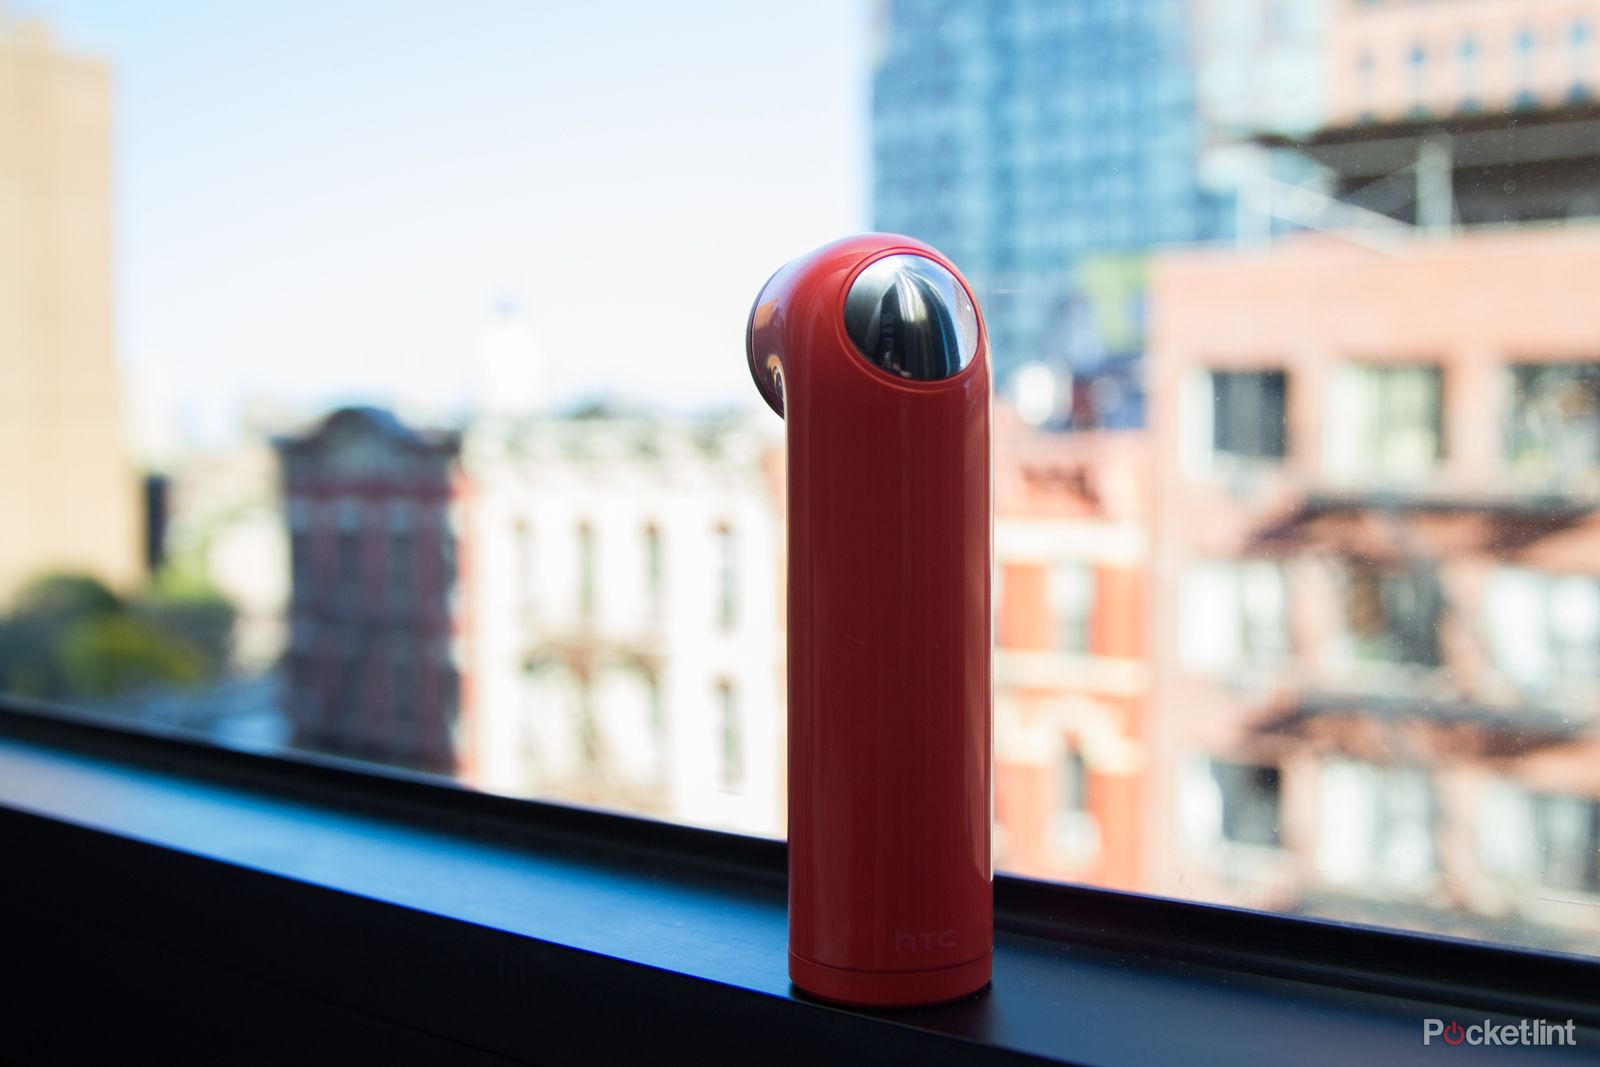 htc re camera previewing the new connected camera image 15